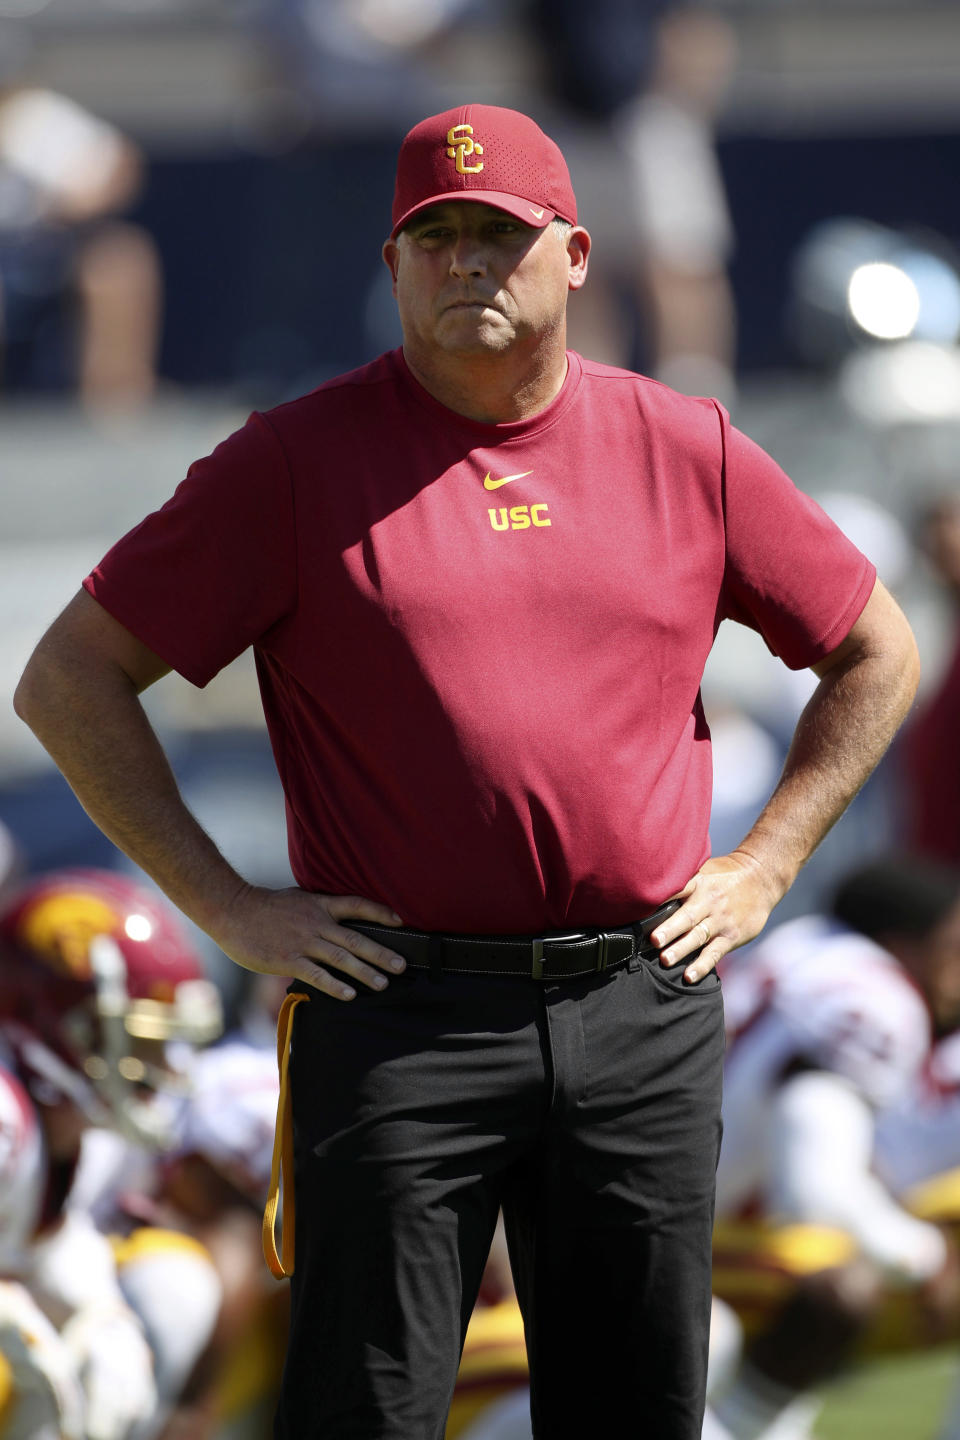 Southern California head coach Clay Helton watches his players warm up before a NCAA college football game against BYU, Saturday, Sept. 14, 2019, in Provo, Utah. (AP Photo/George Frey)